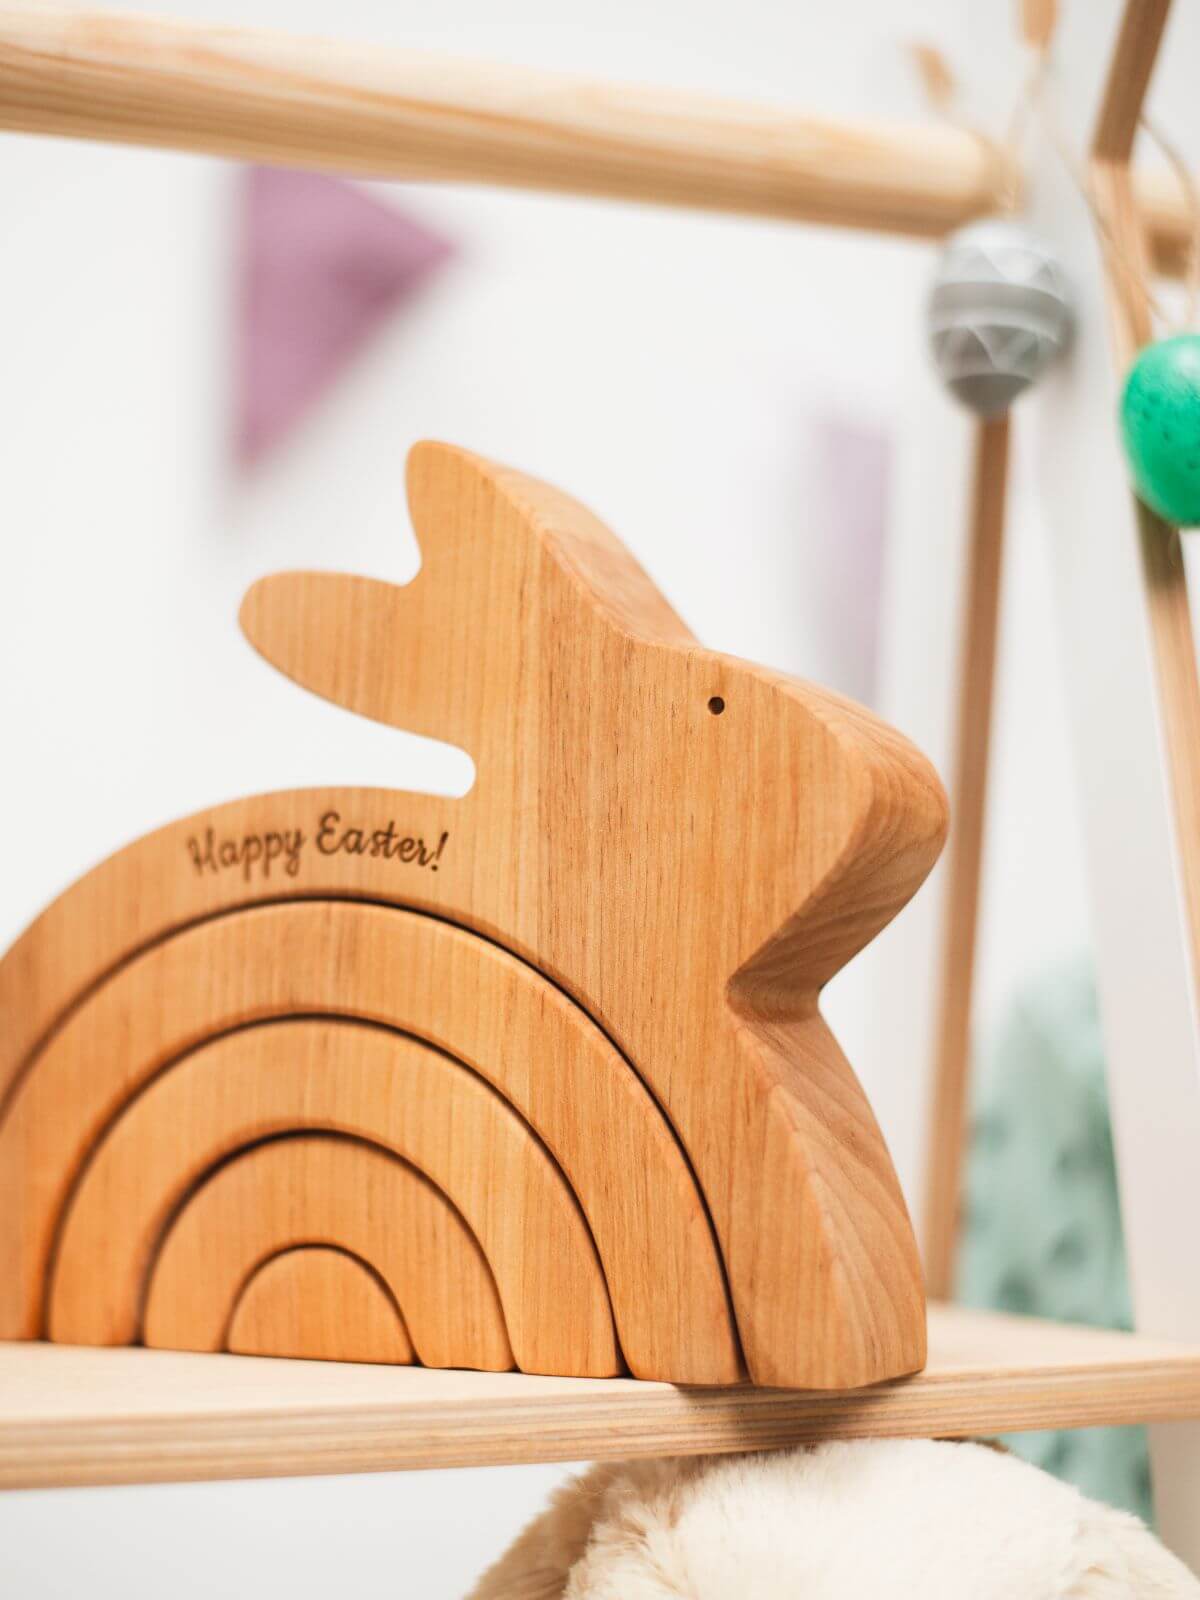  bunny toy on wooden